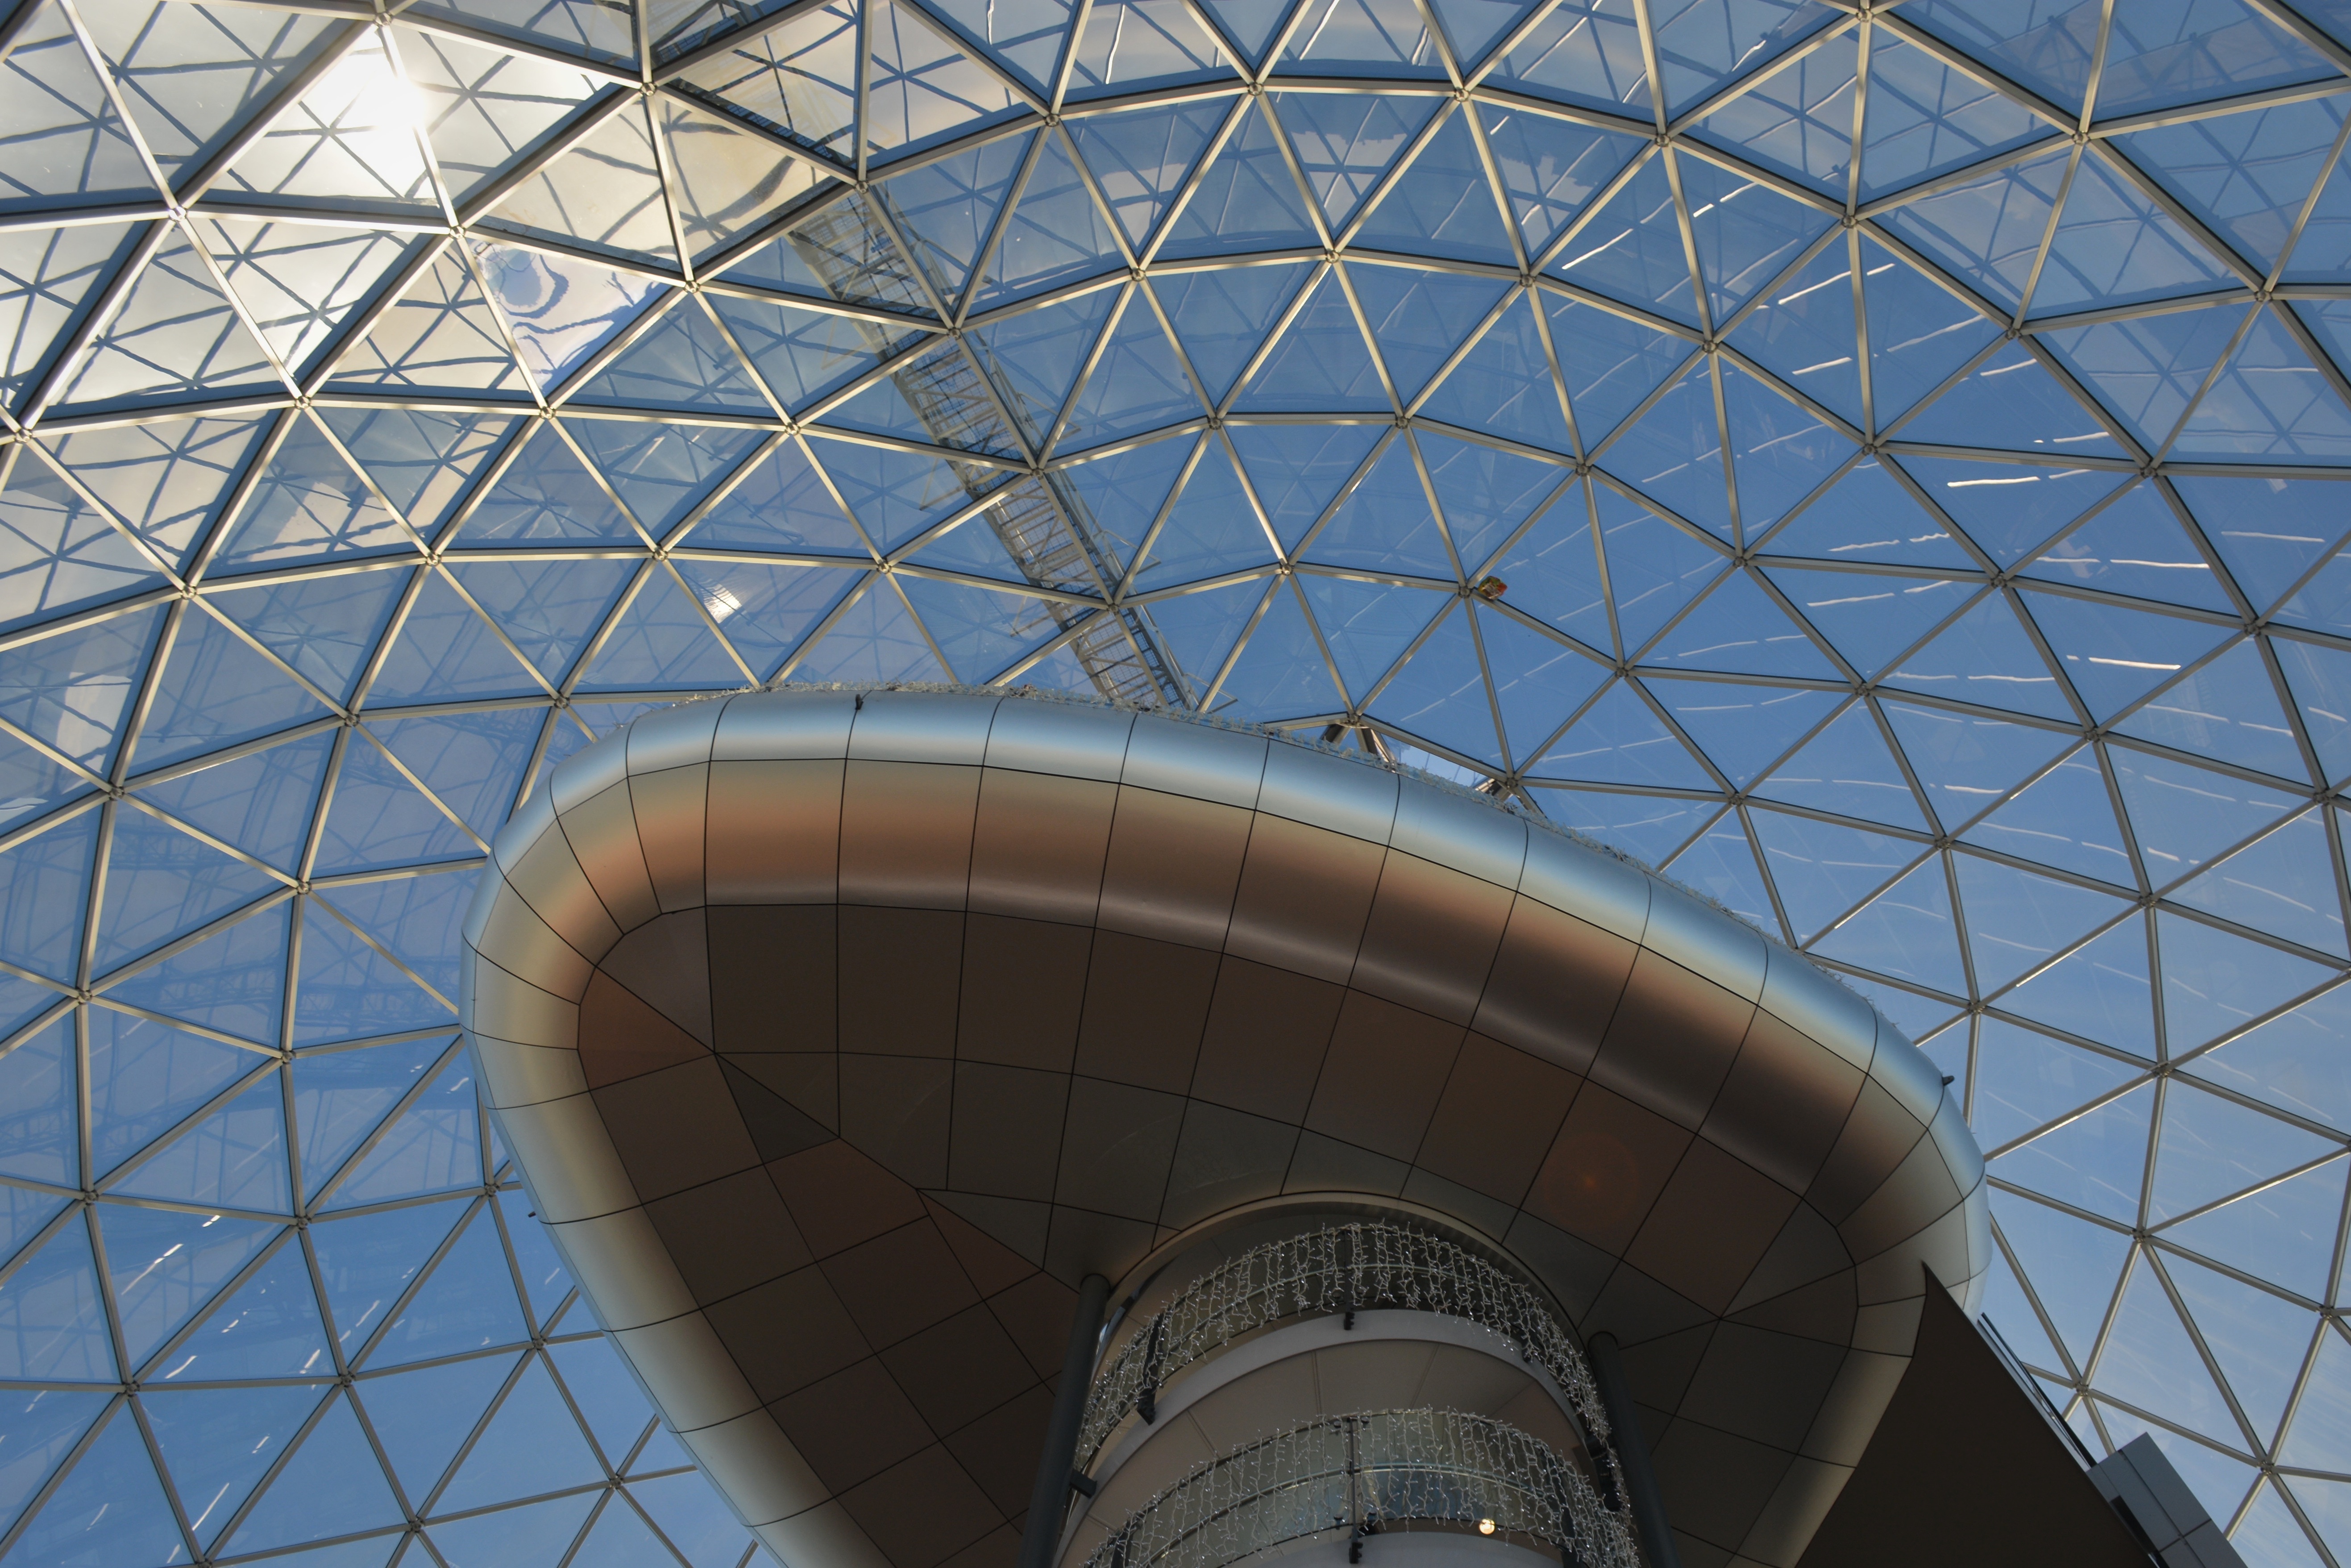 worm's eye view of curtain wall dome structure